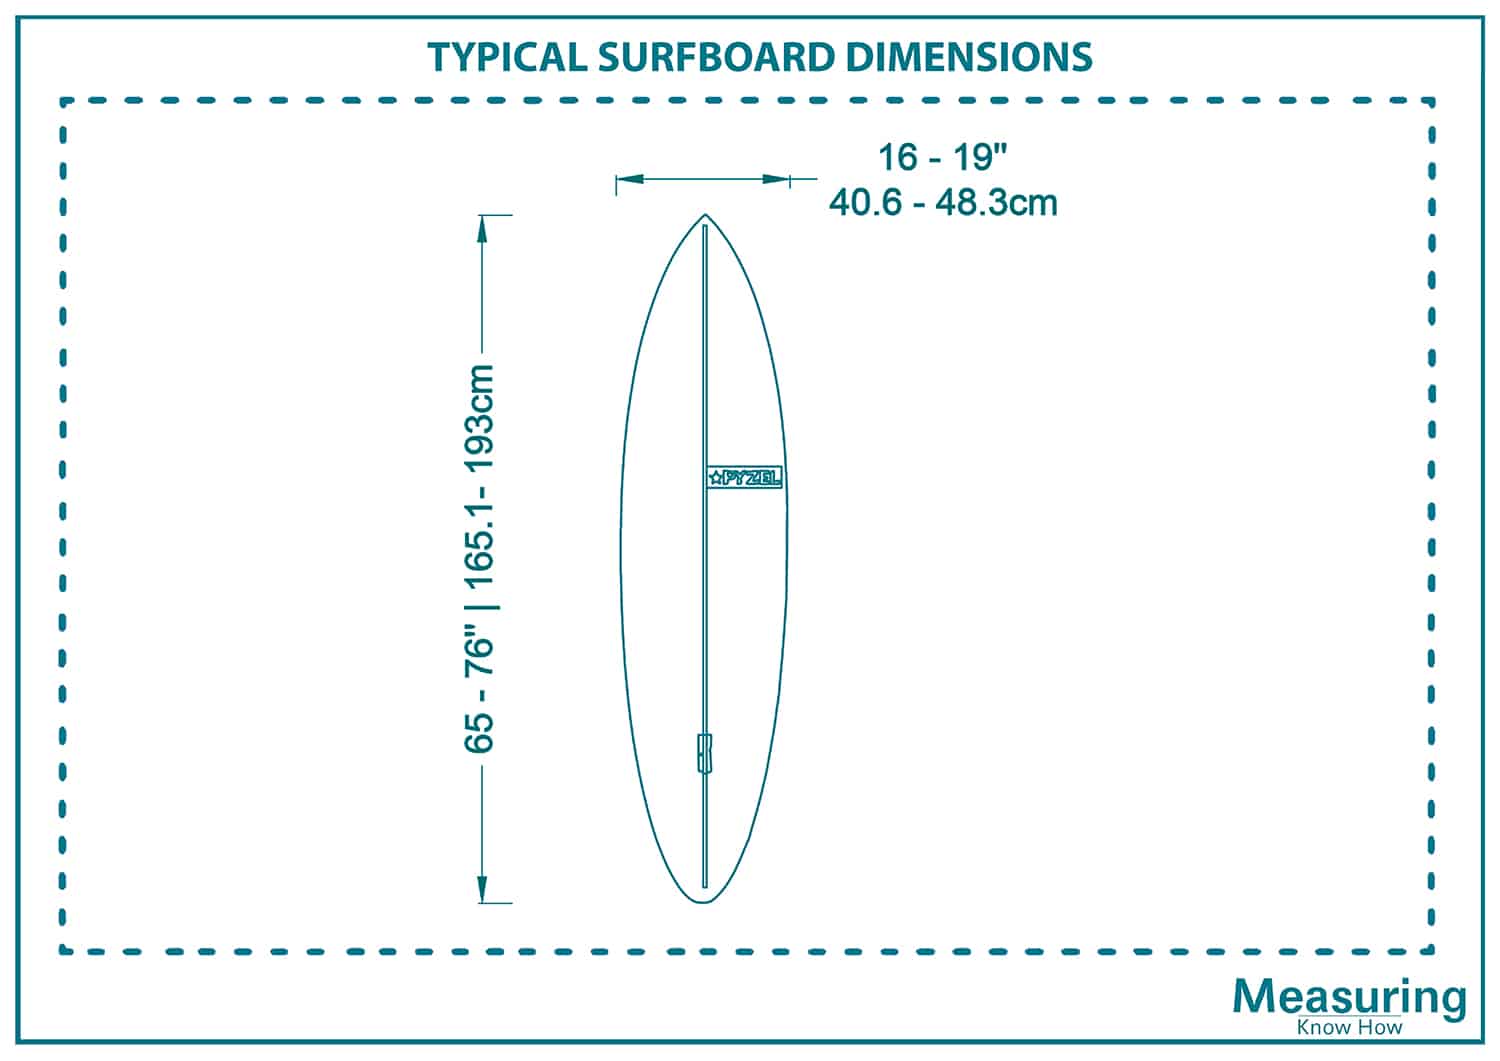 Typical surfboard dimensions